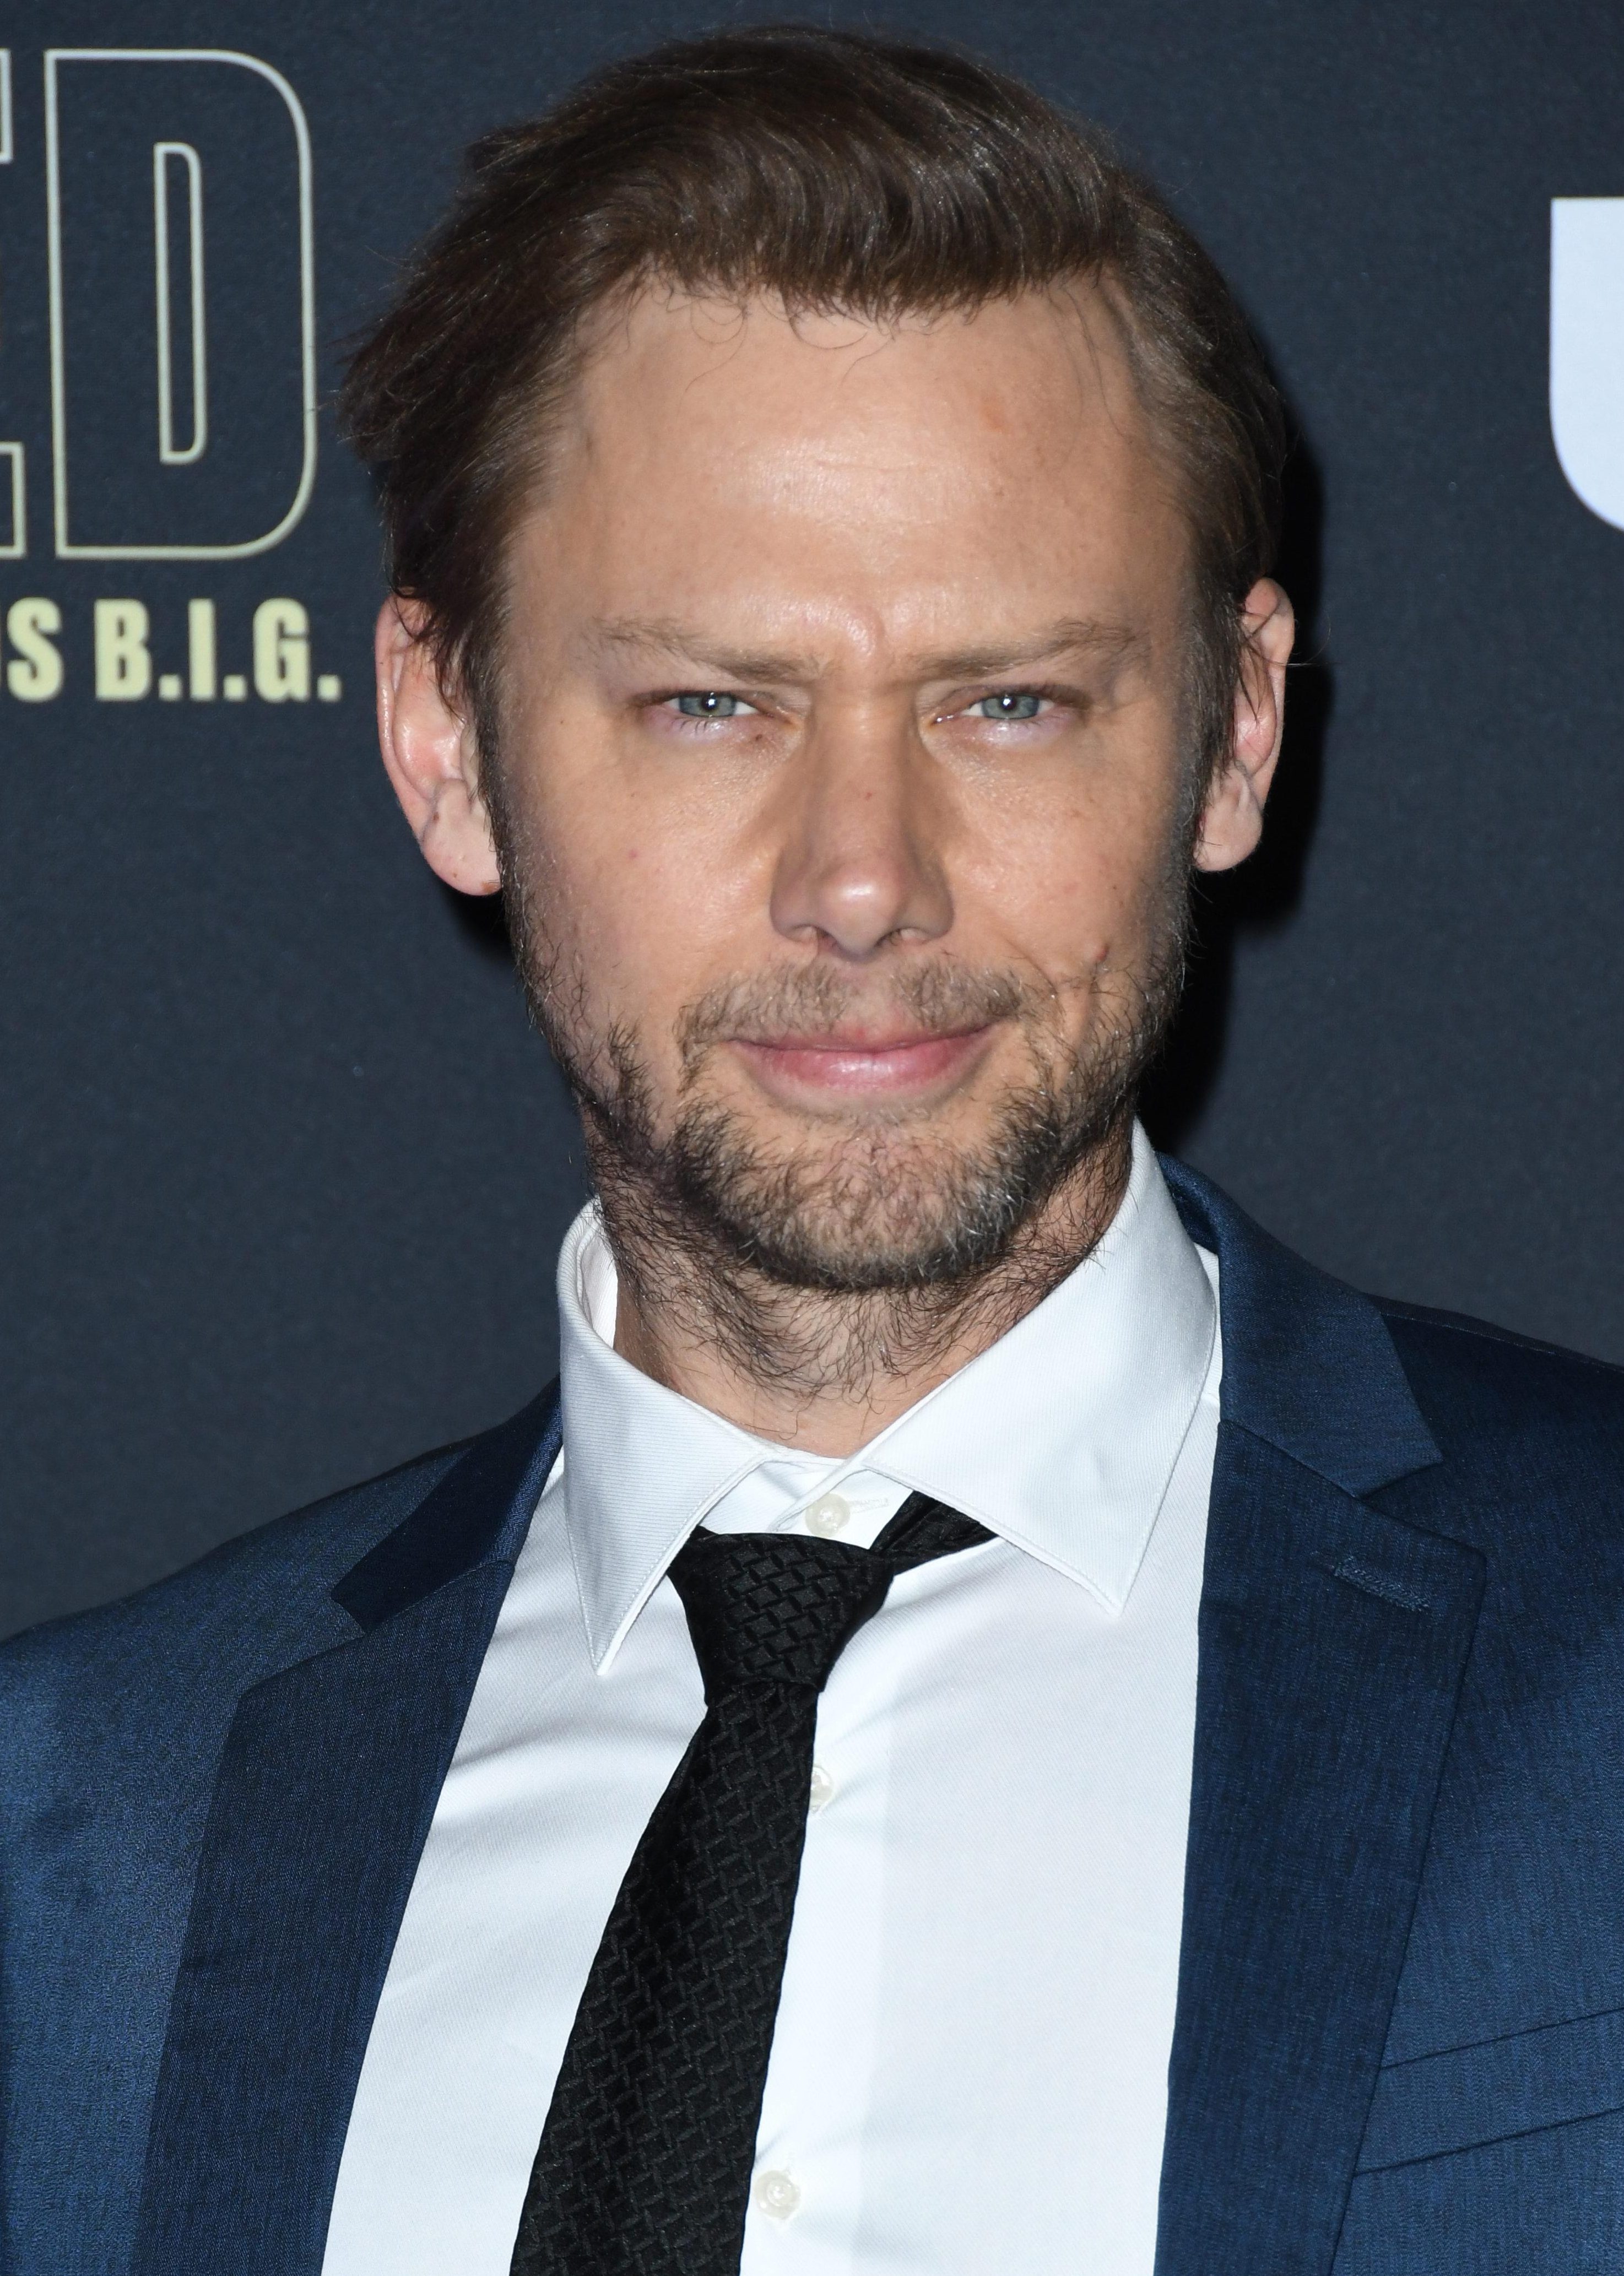 How tall is Jimmi Simpson?